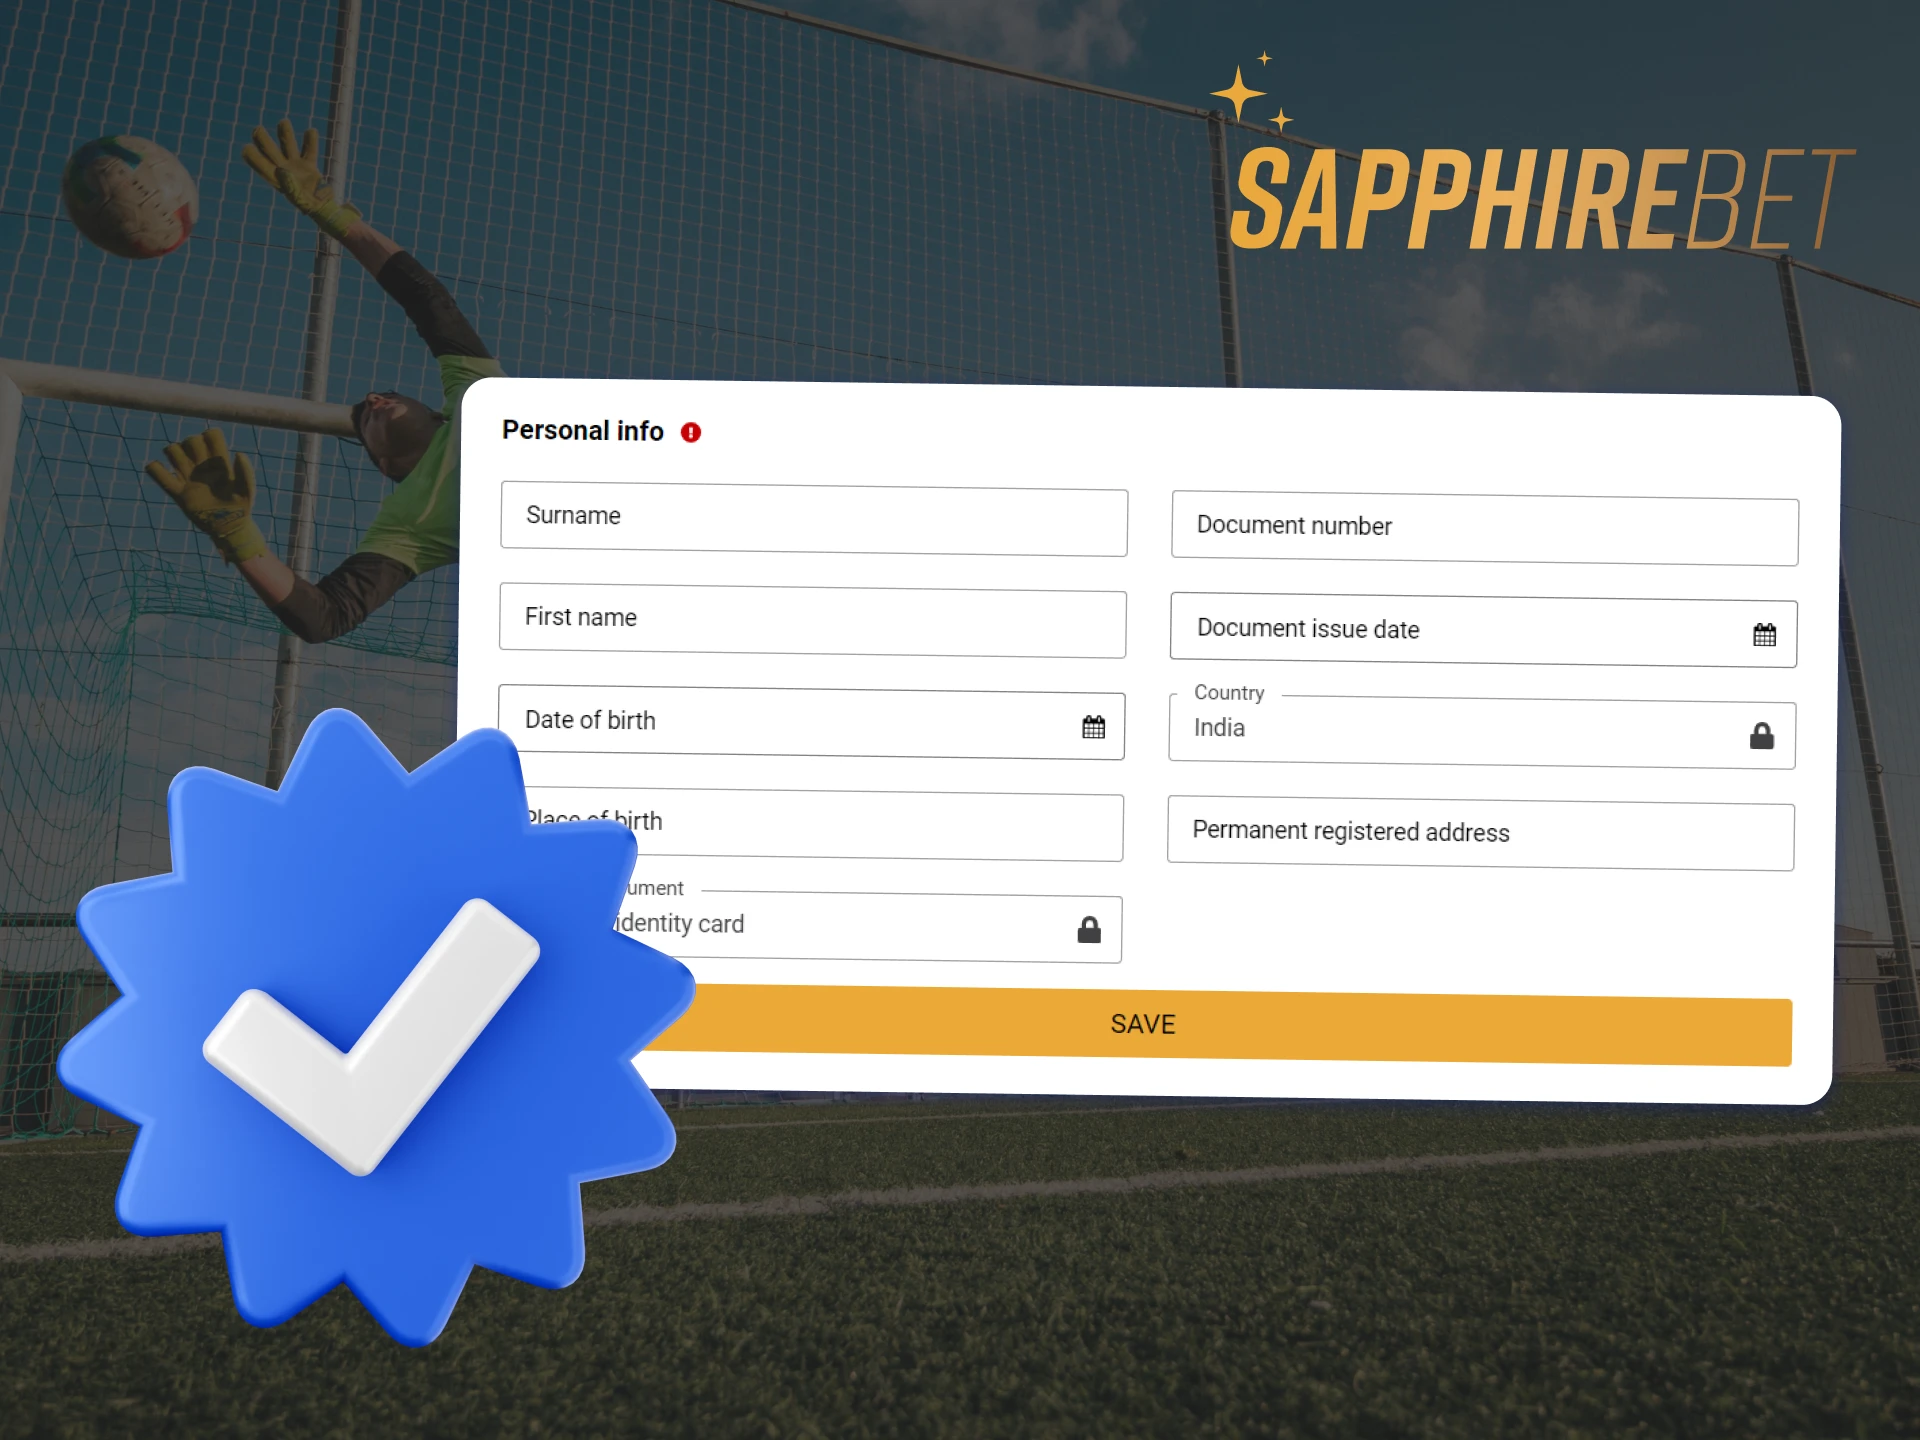 To start betting on Sapphirebet, you need to verify your account,